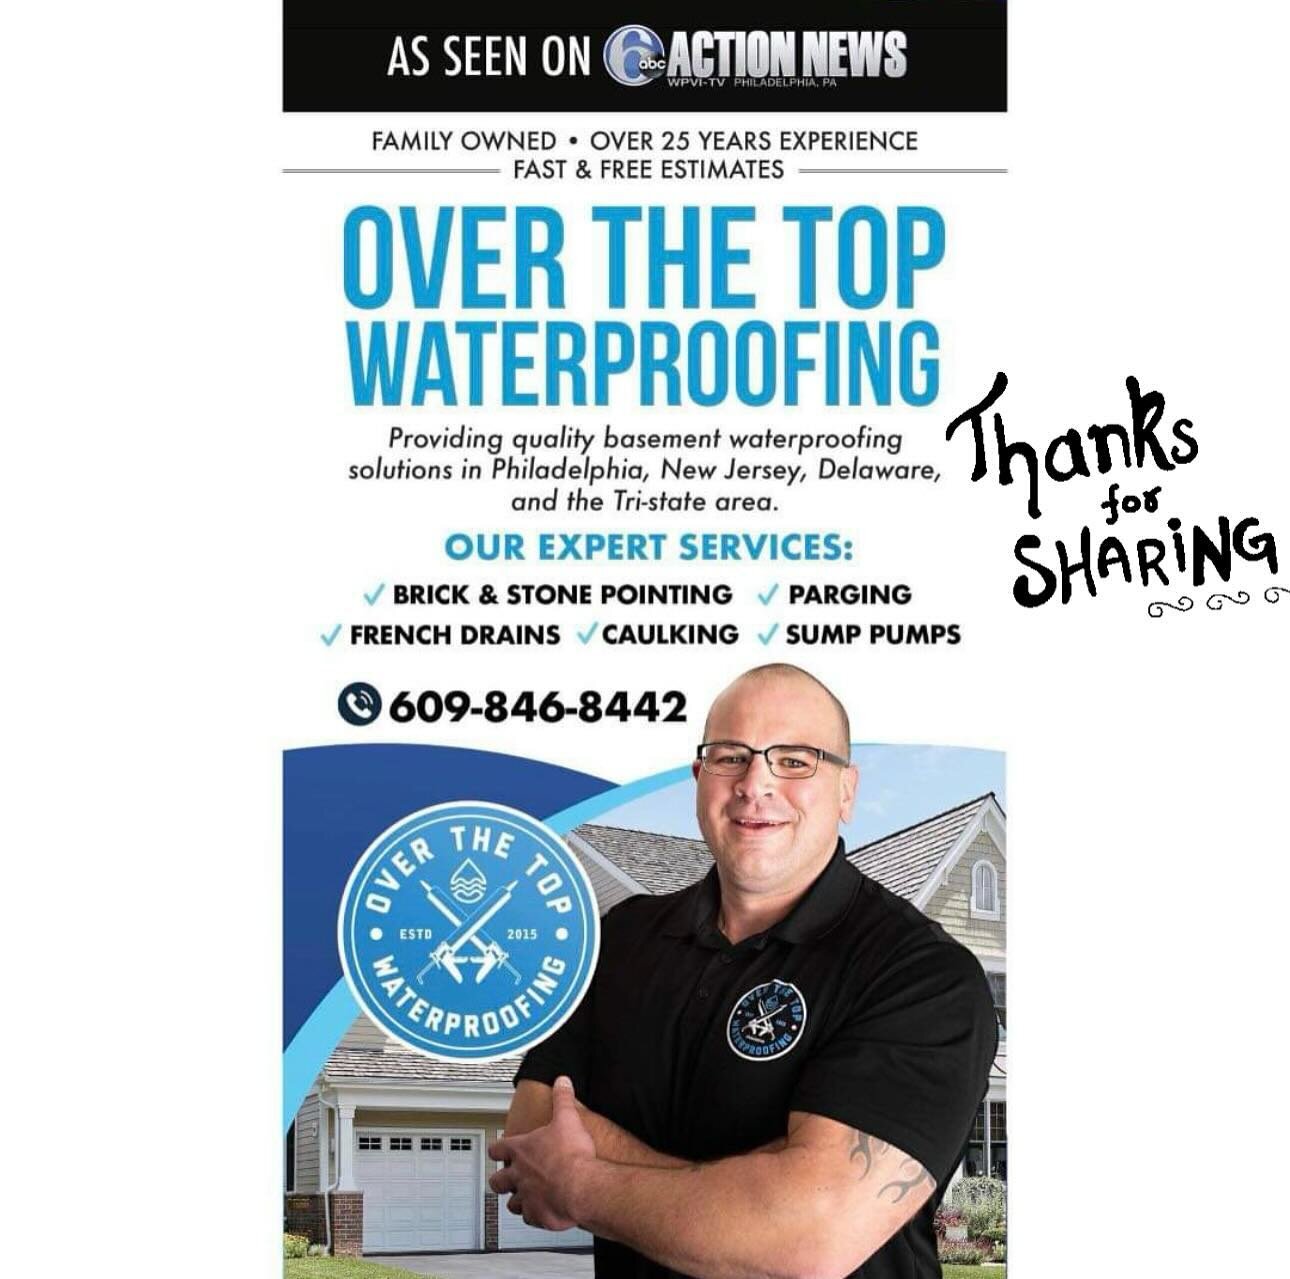 Wet Basement? Give us a call or fill out an appointment request on the website. OverTheTopWaterproofing.com #OverTheTopWaterproofing 💧